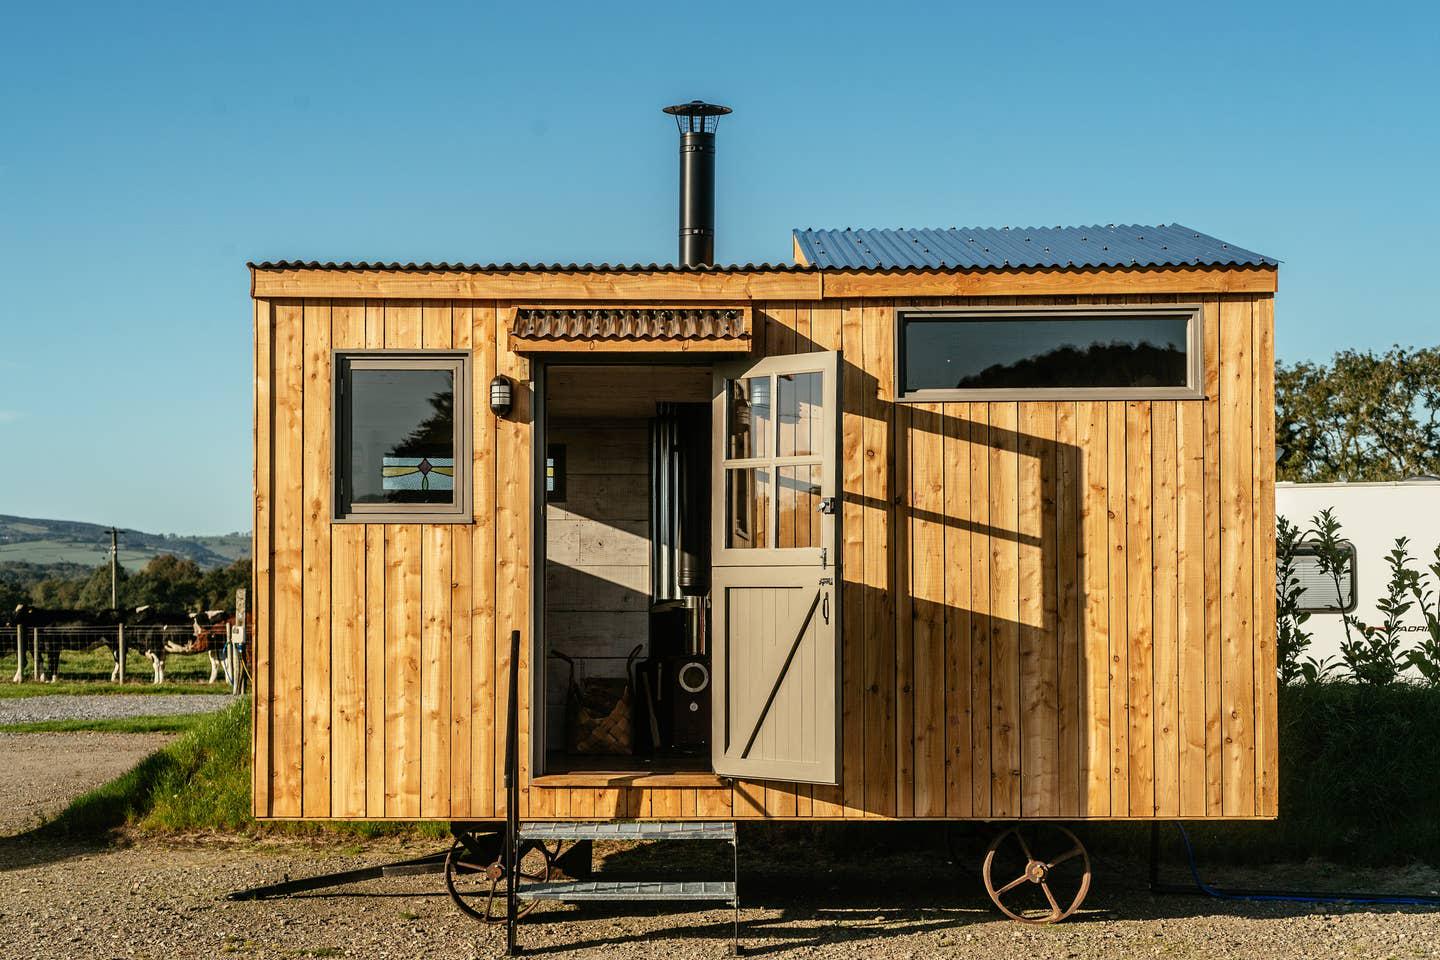 The Tiny House really is a modern, compact home in miniature.